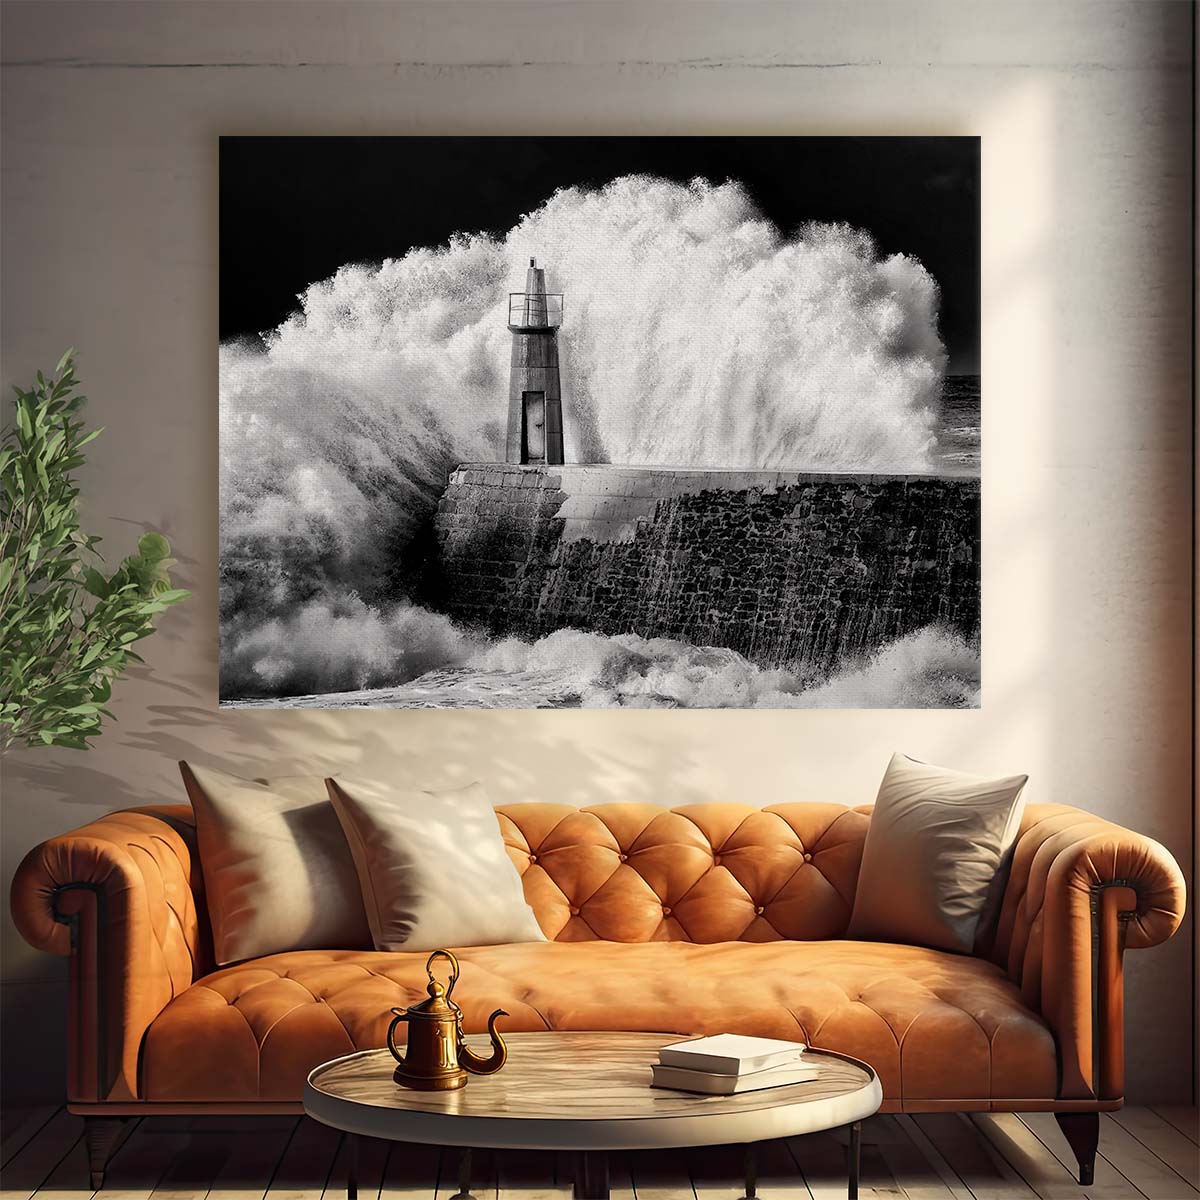 Stormy Asturias Lighthouse Waves Splash Wall Art by Luxuriance Designs. Made in USA.